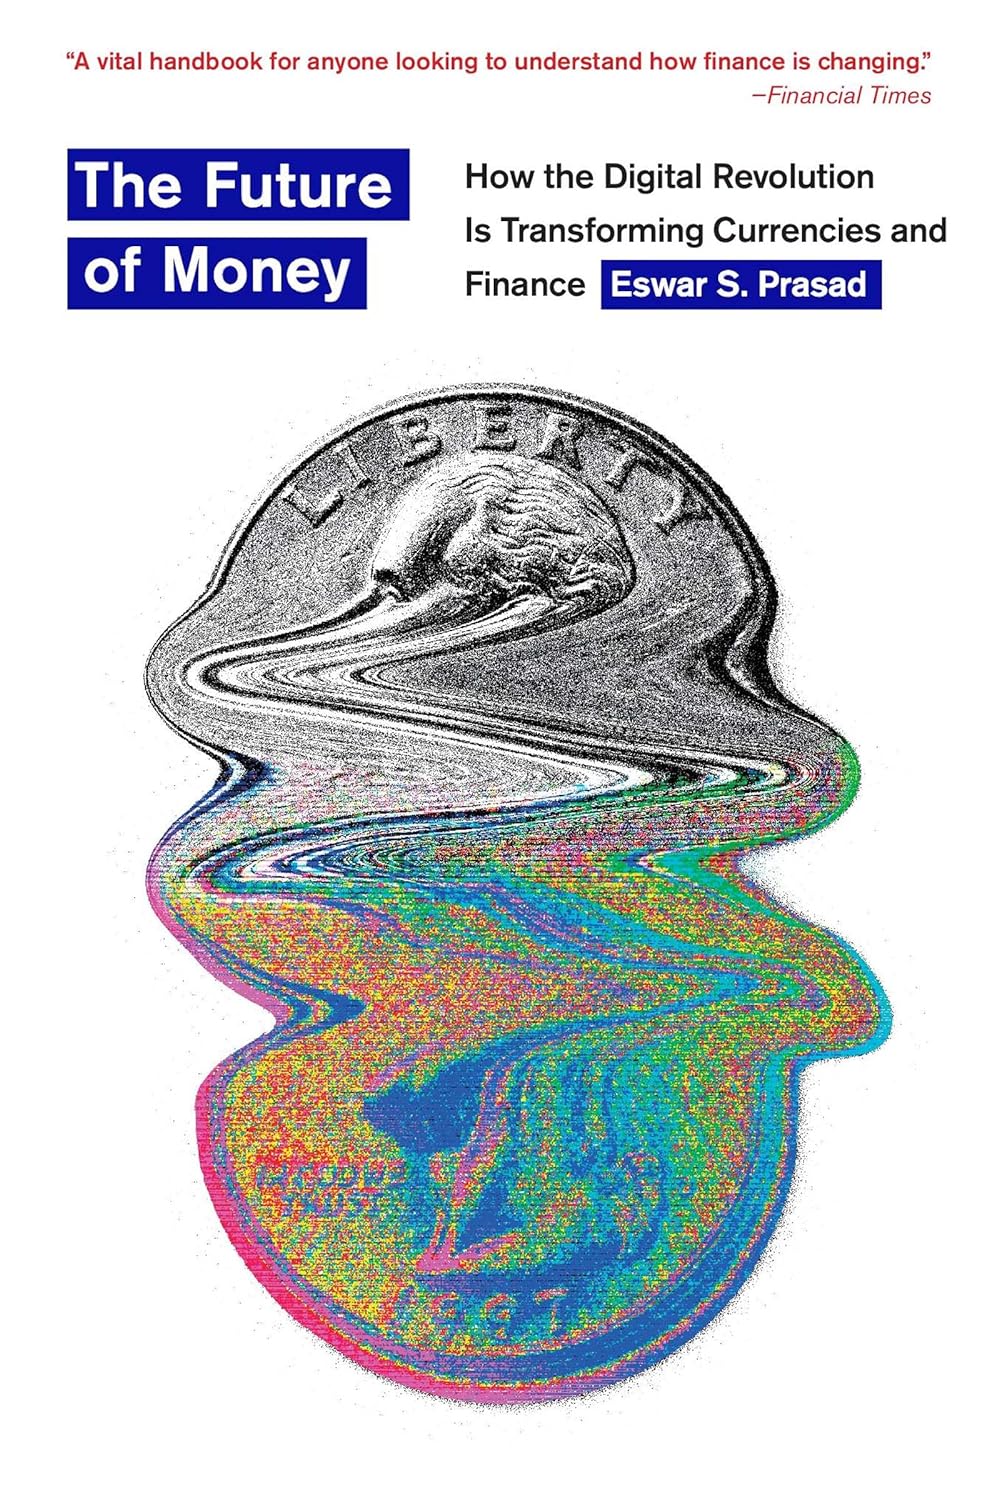 Book cover: "The Future of Money."